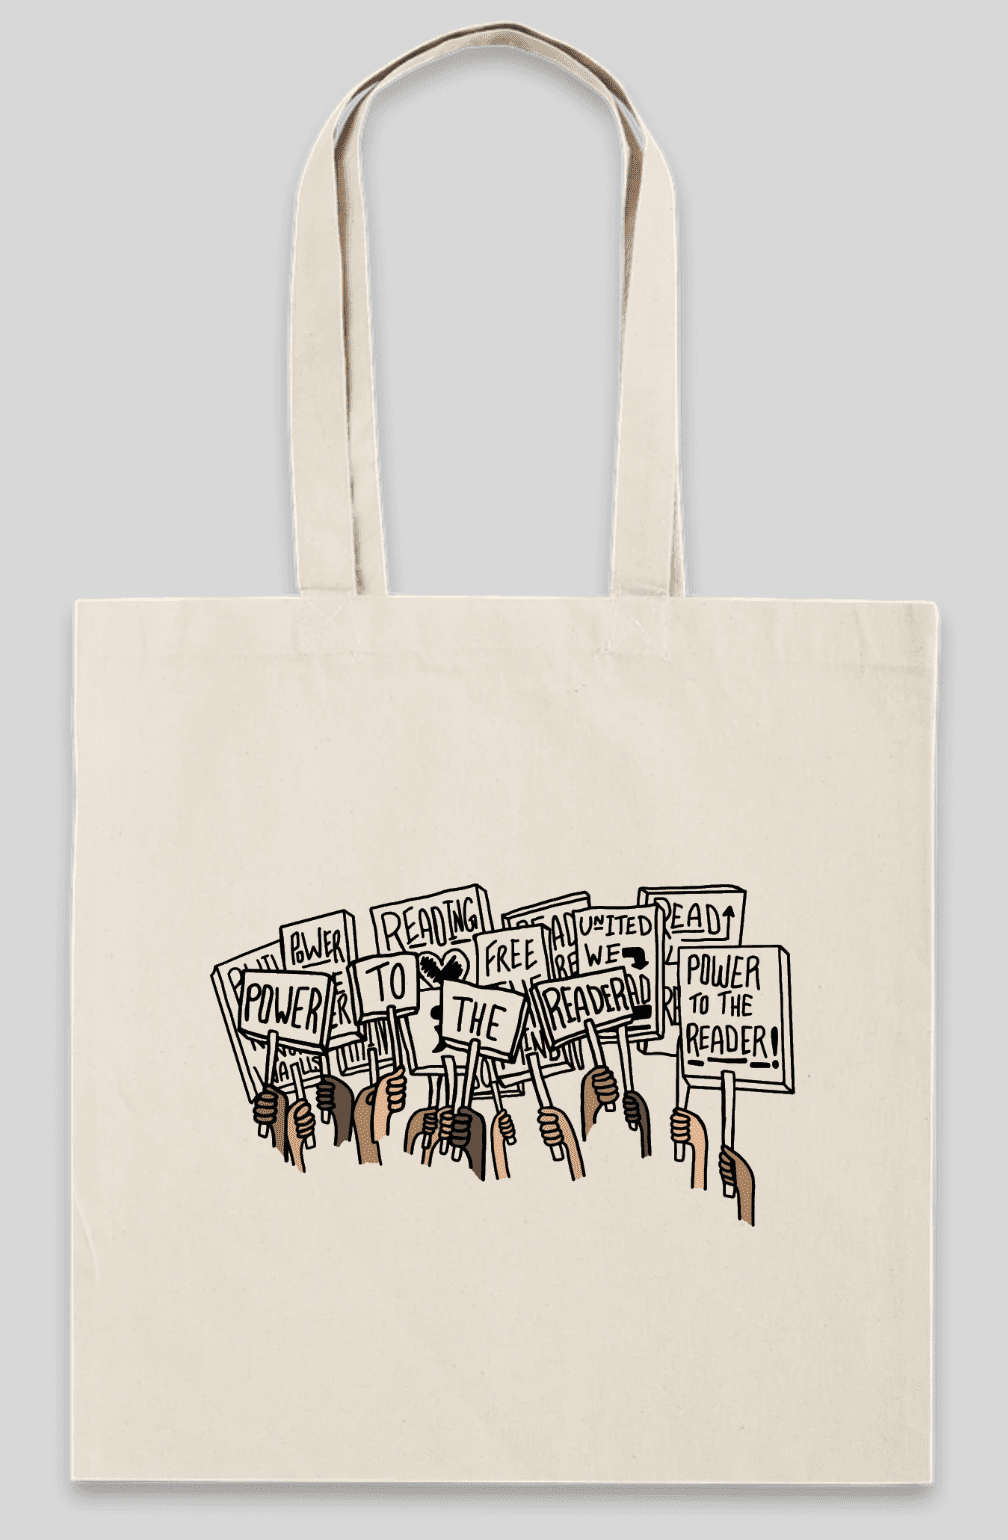 Power to the Reader tote from Semicolon Bookstore in Chicago